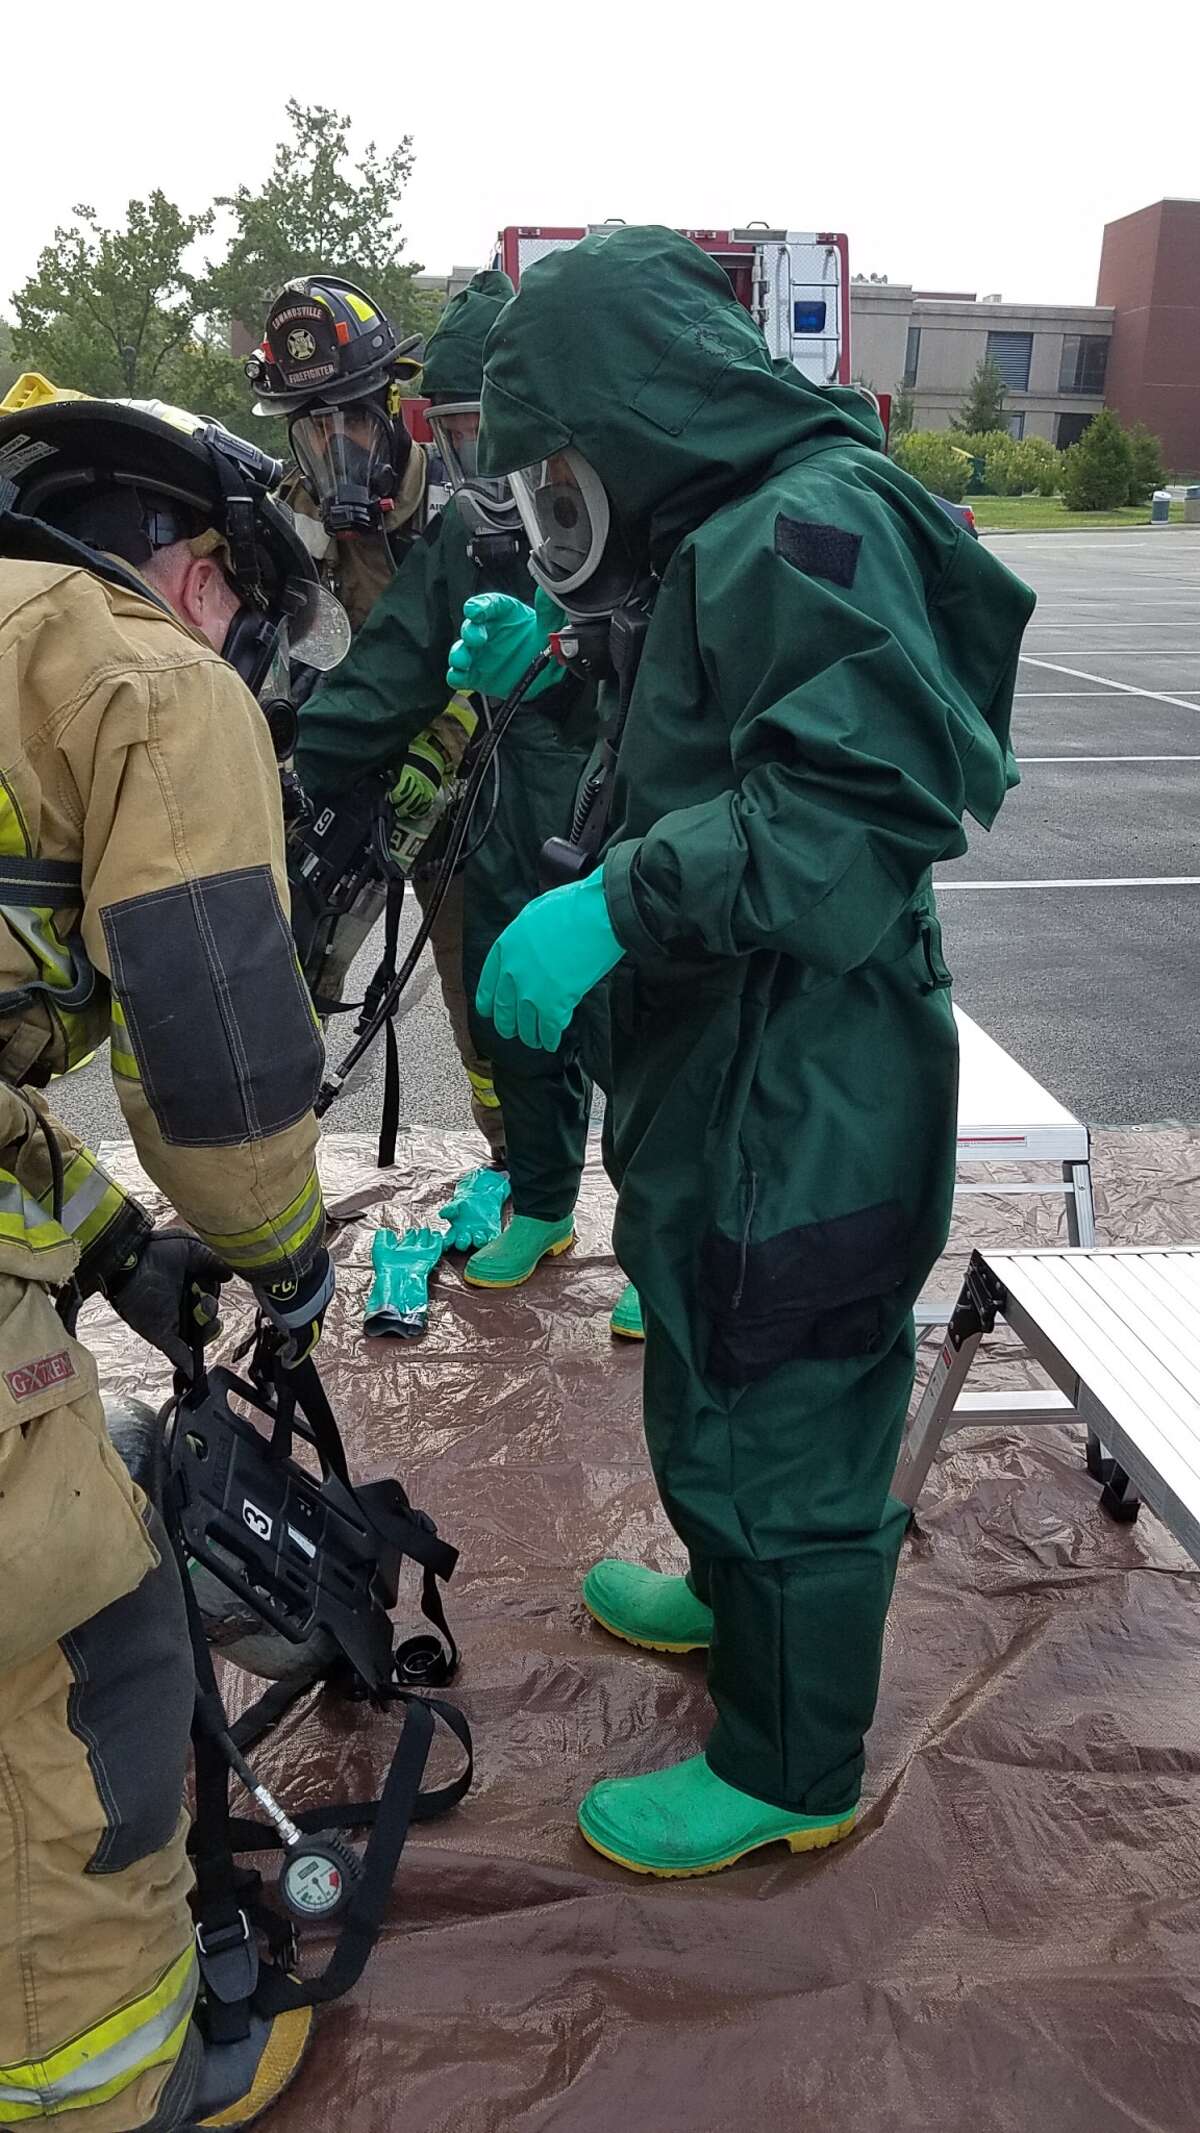 Public safety officials had to suit up while participating in Monday's chemical contamination simulation at SIUE's science building.